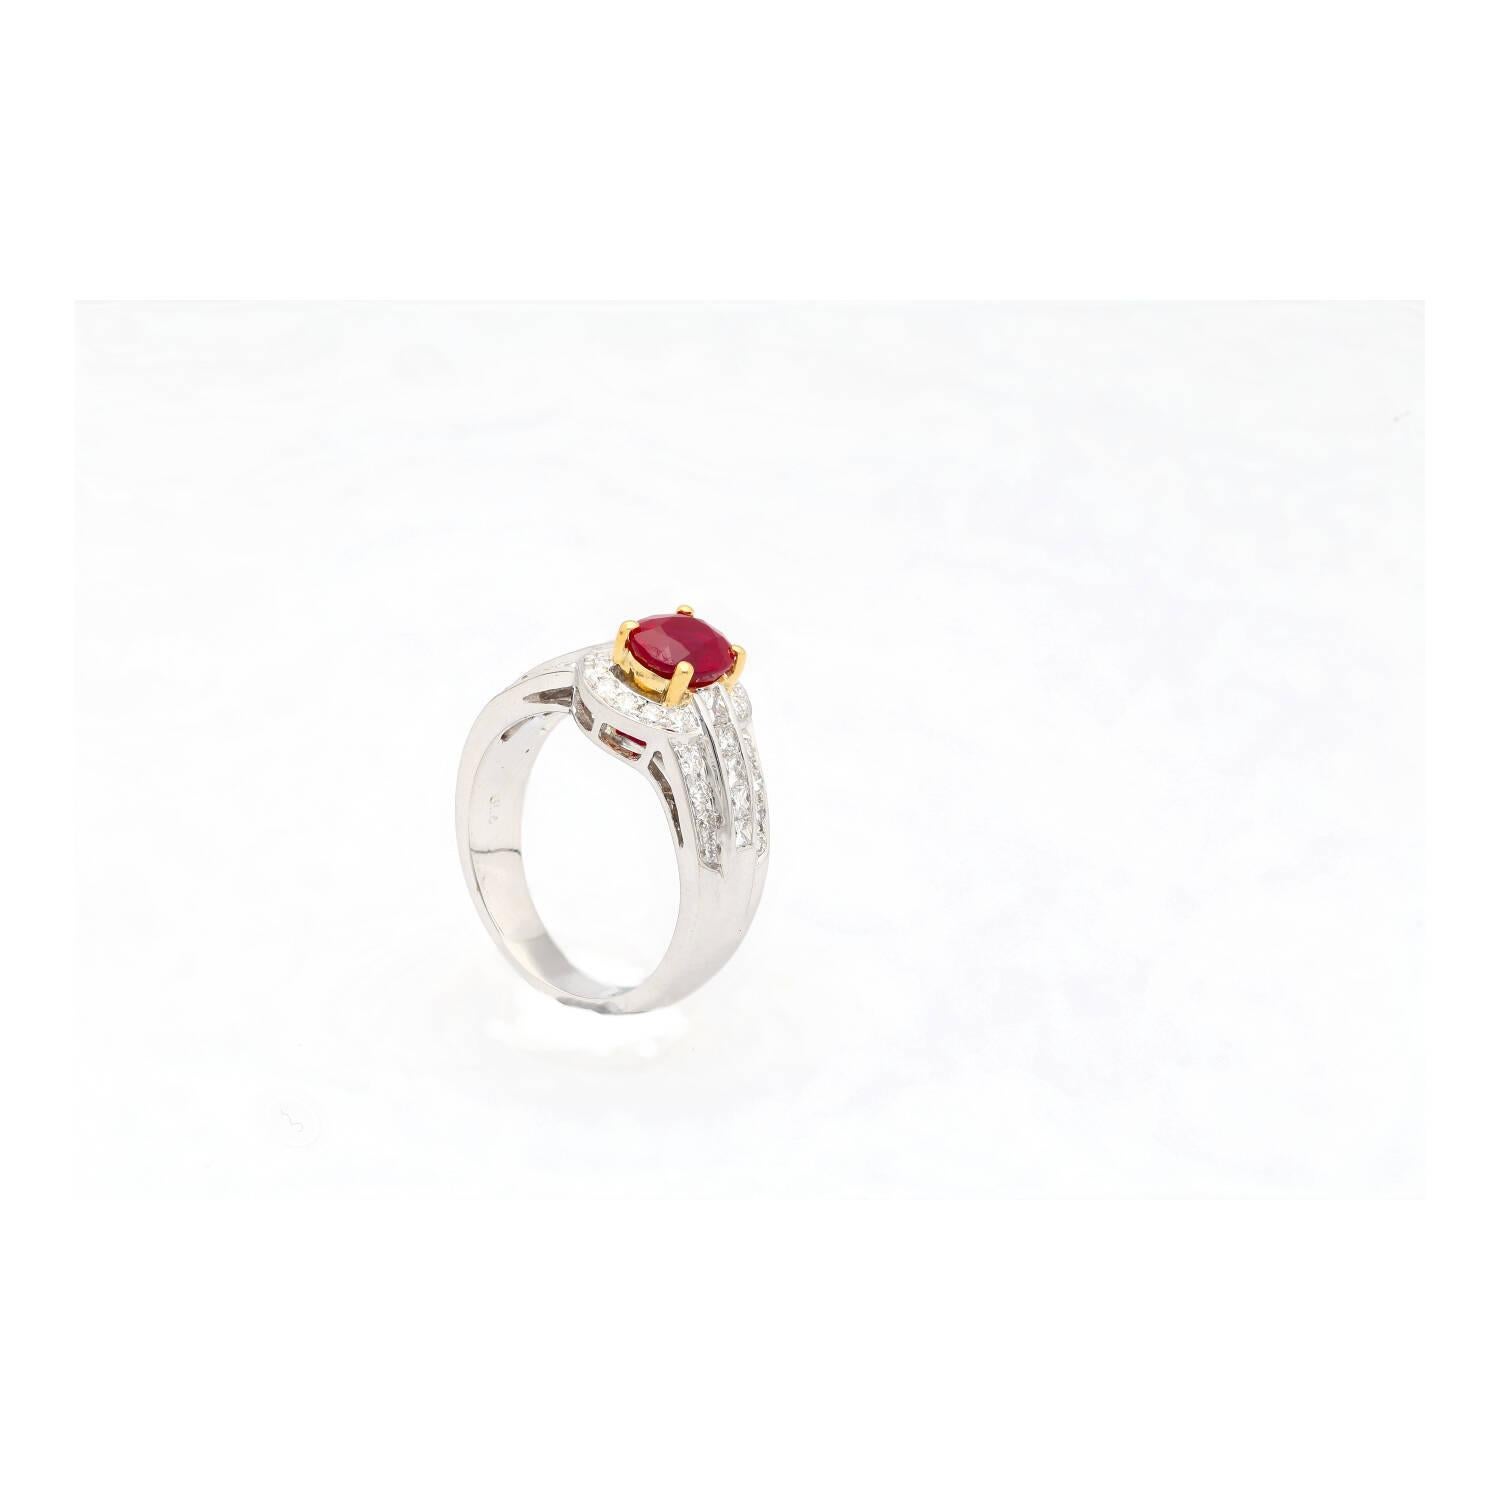 Contemporary GRS Certified 1.37 Carat Burma Pigeon Blood Ruby & Diamond Ring in 18K Gold For Sale